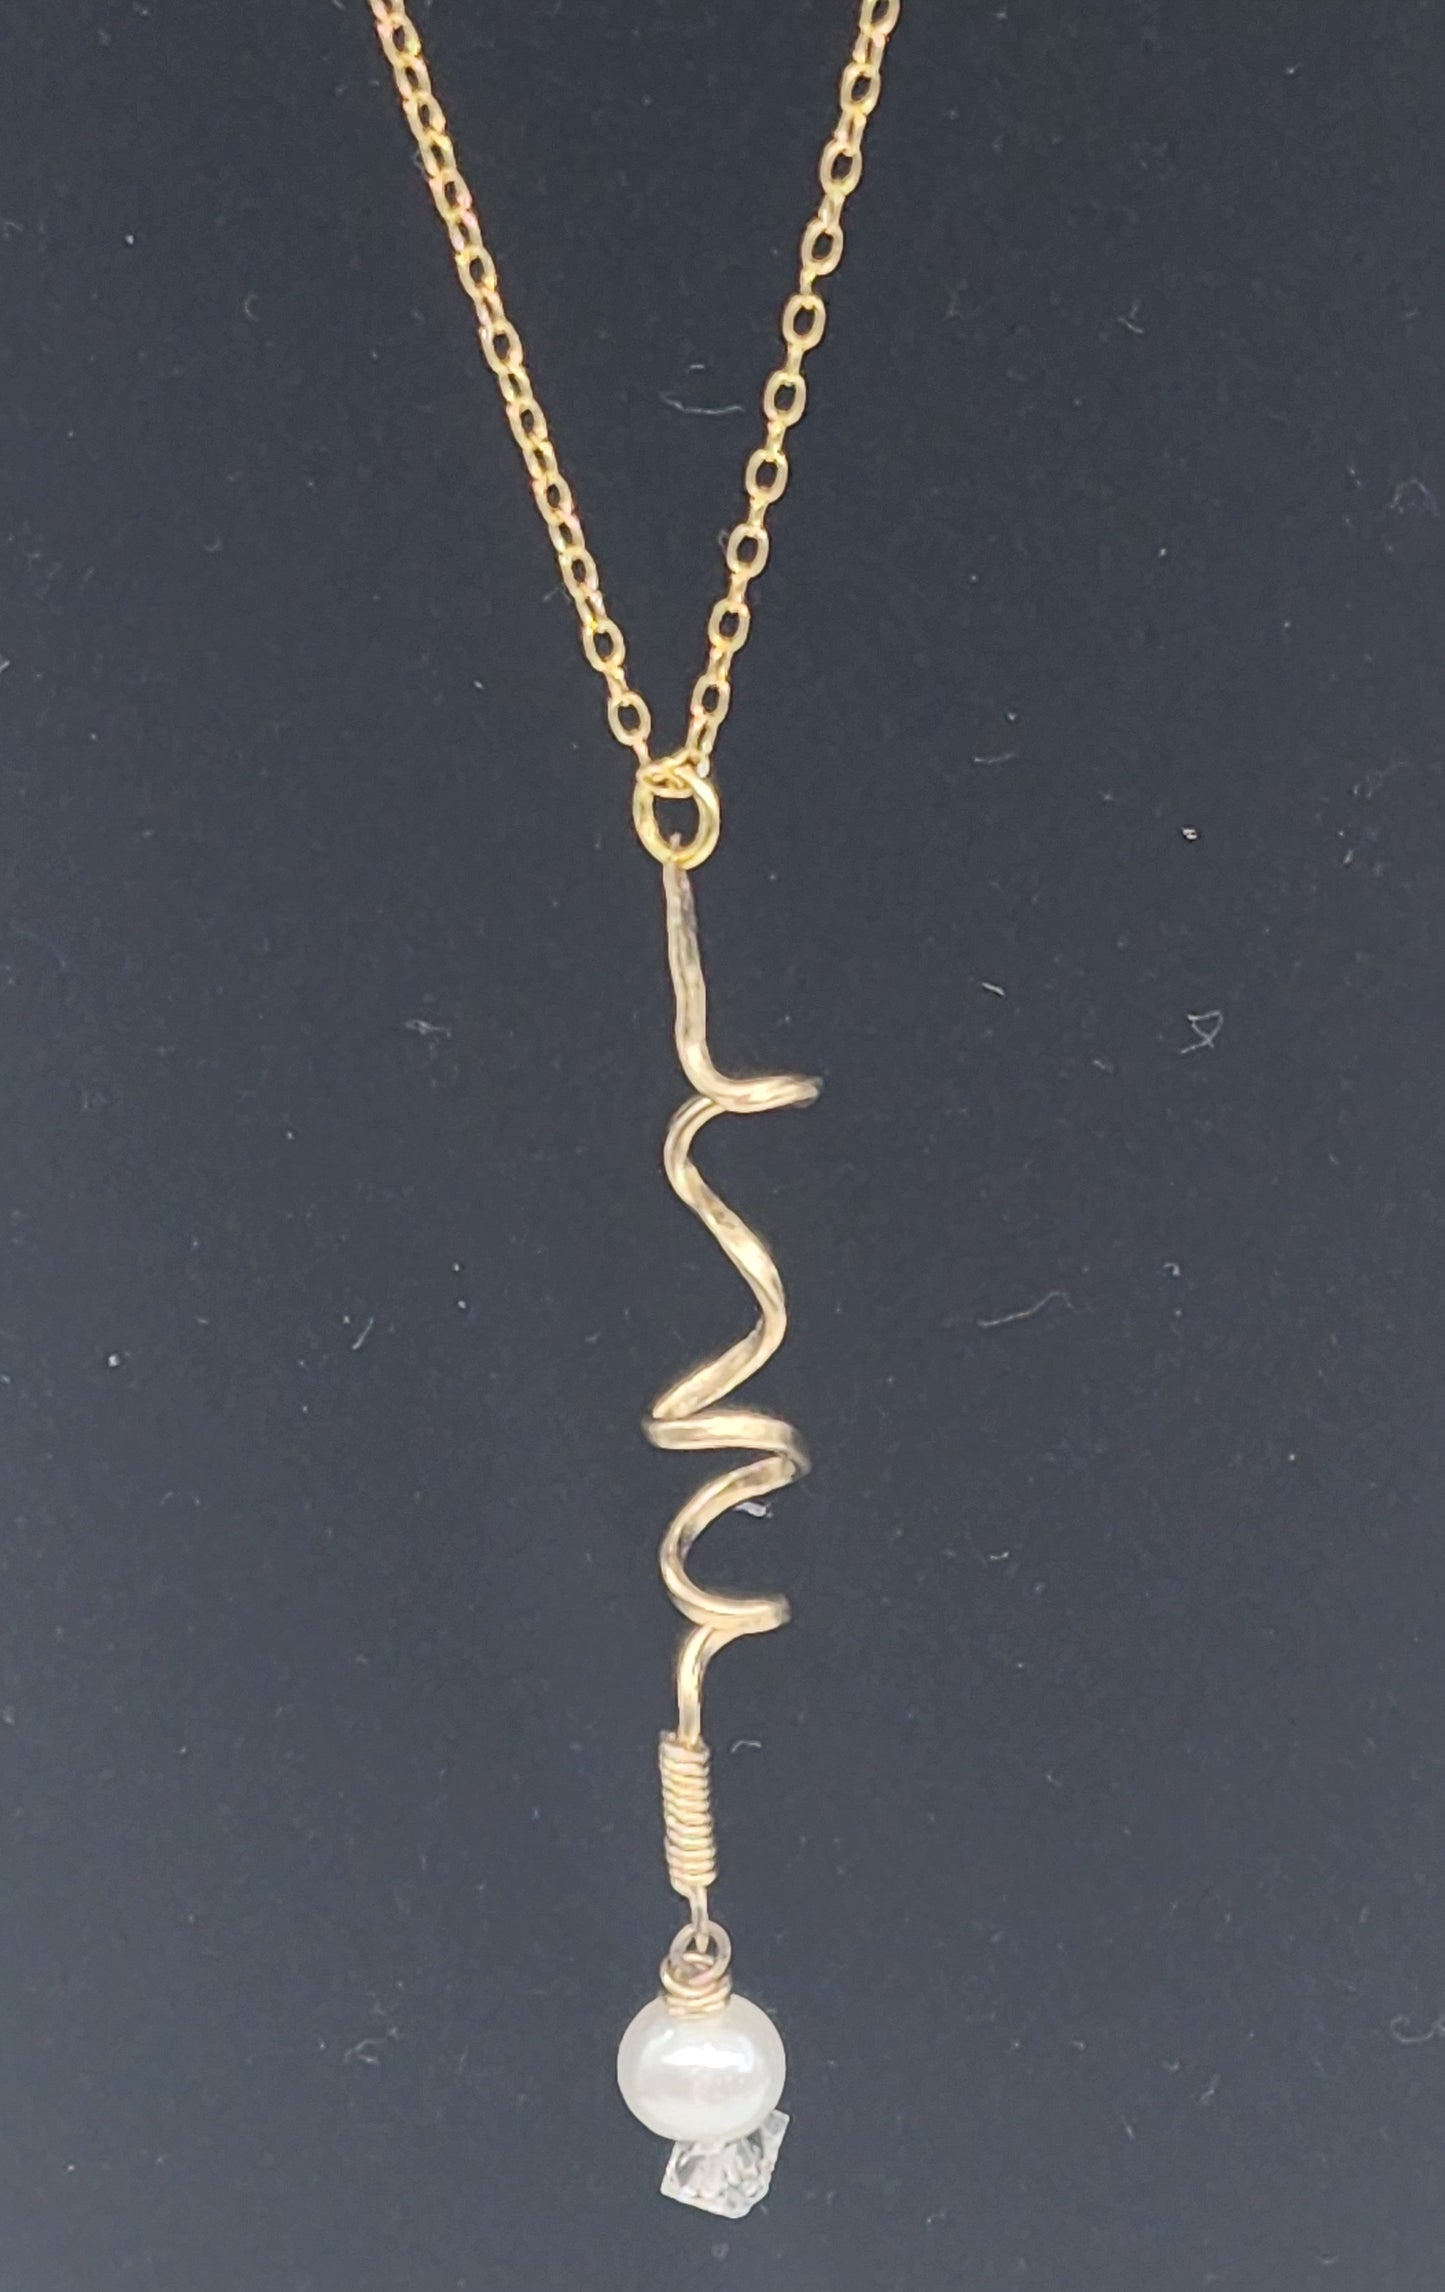 The Twisted Path we Roam Necklace